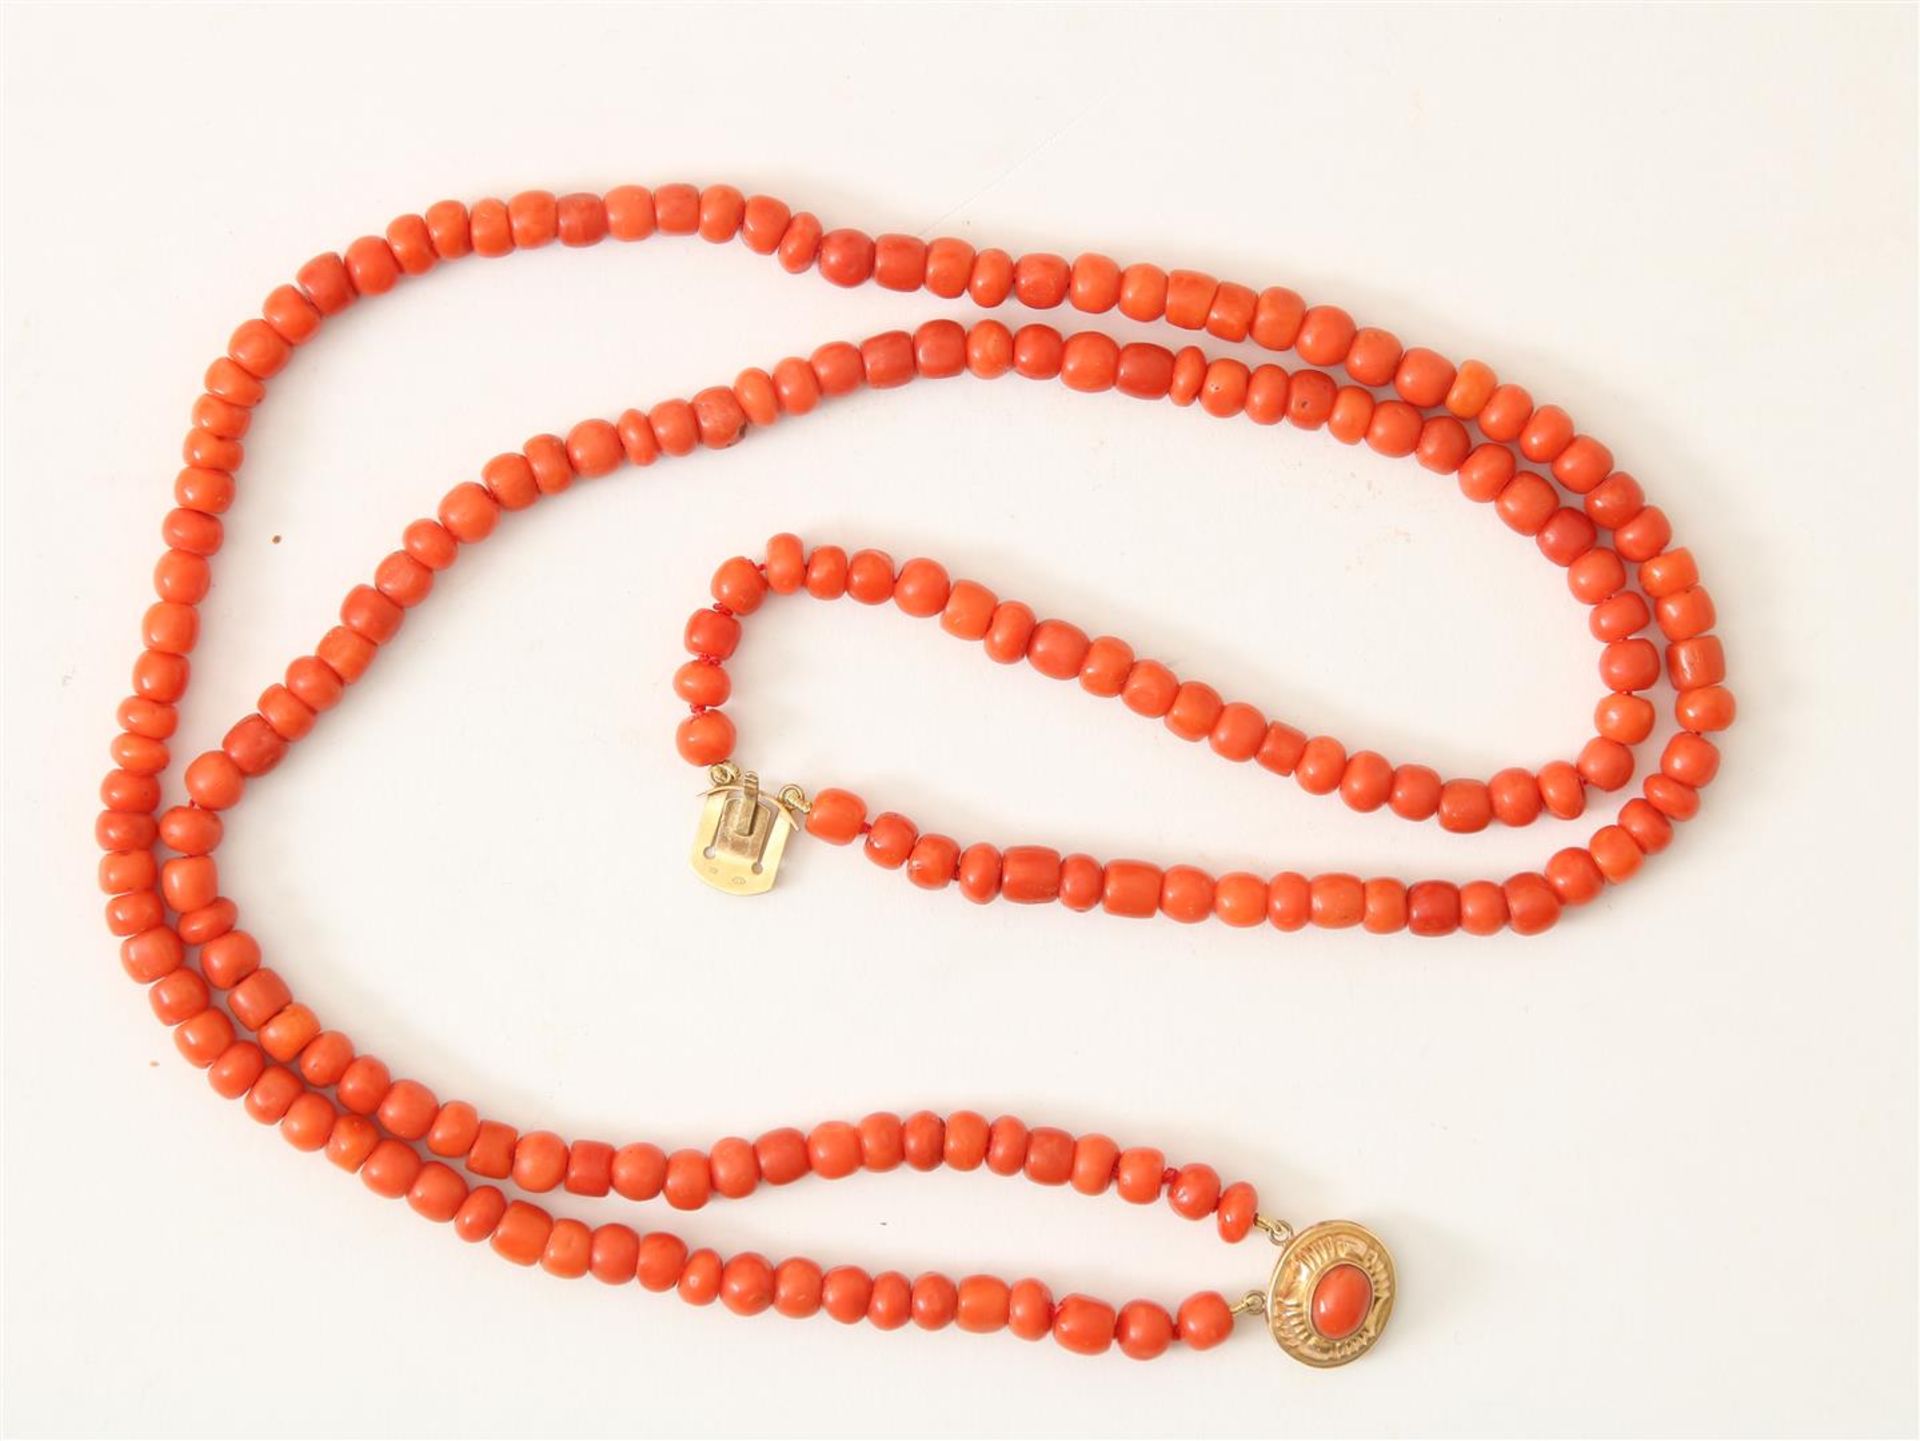 Red coral 2-way necklace with a round gold clasp set with red coral, l.46 cm. - Image 2 of 3